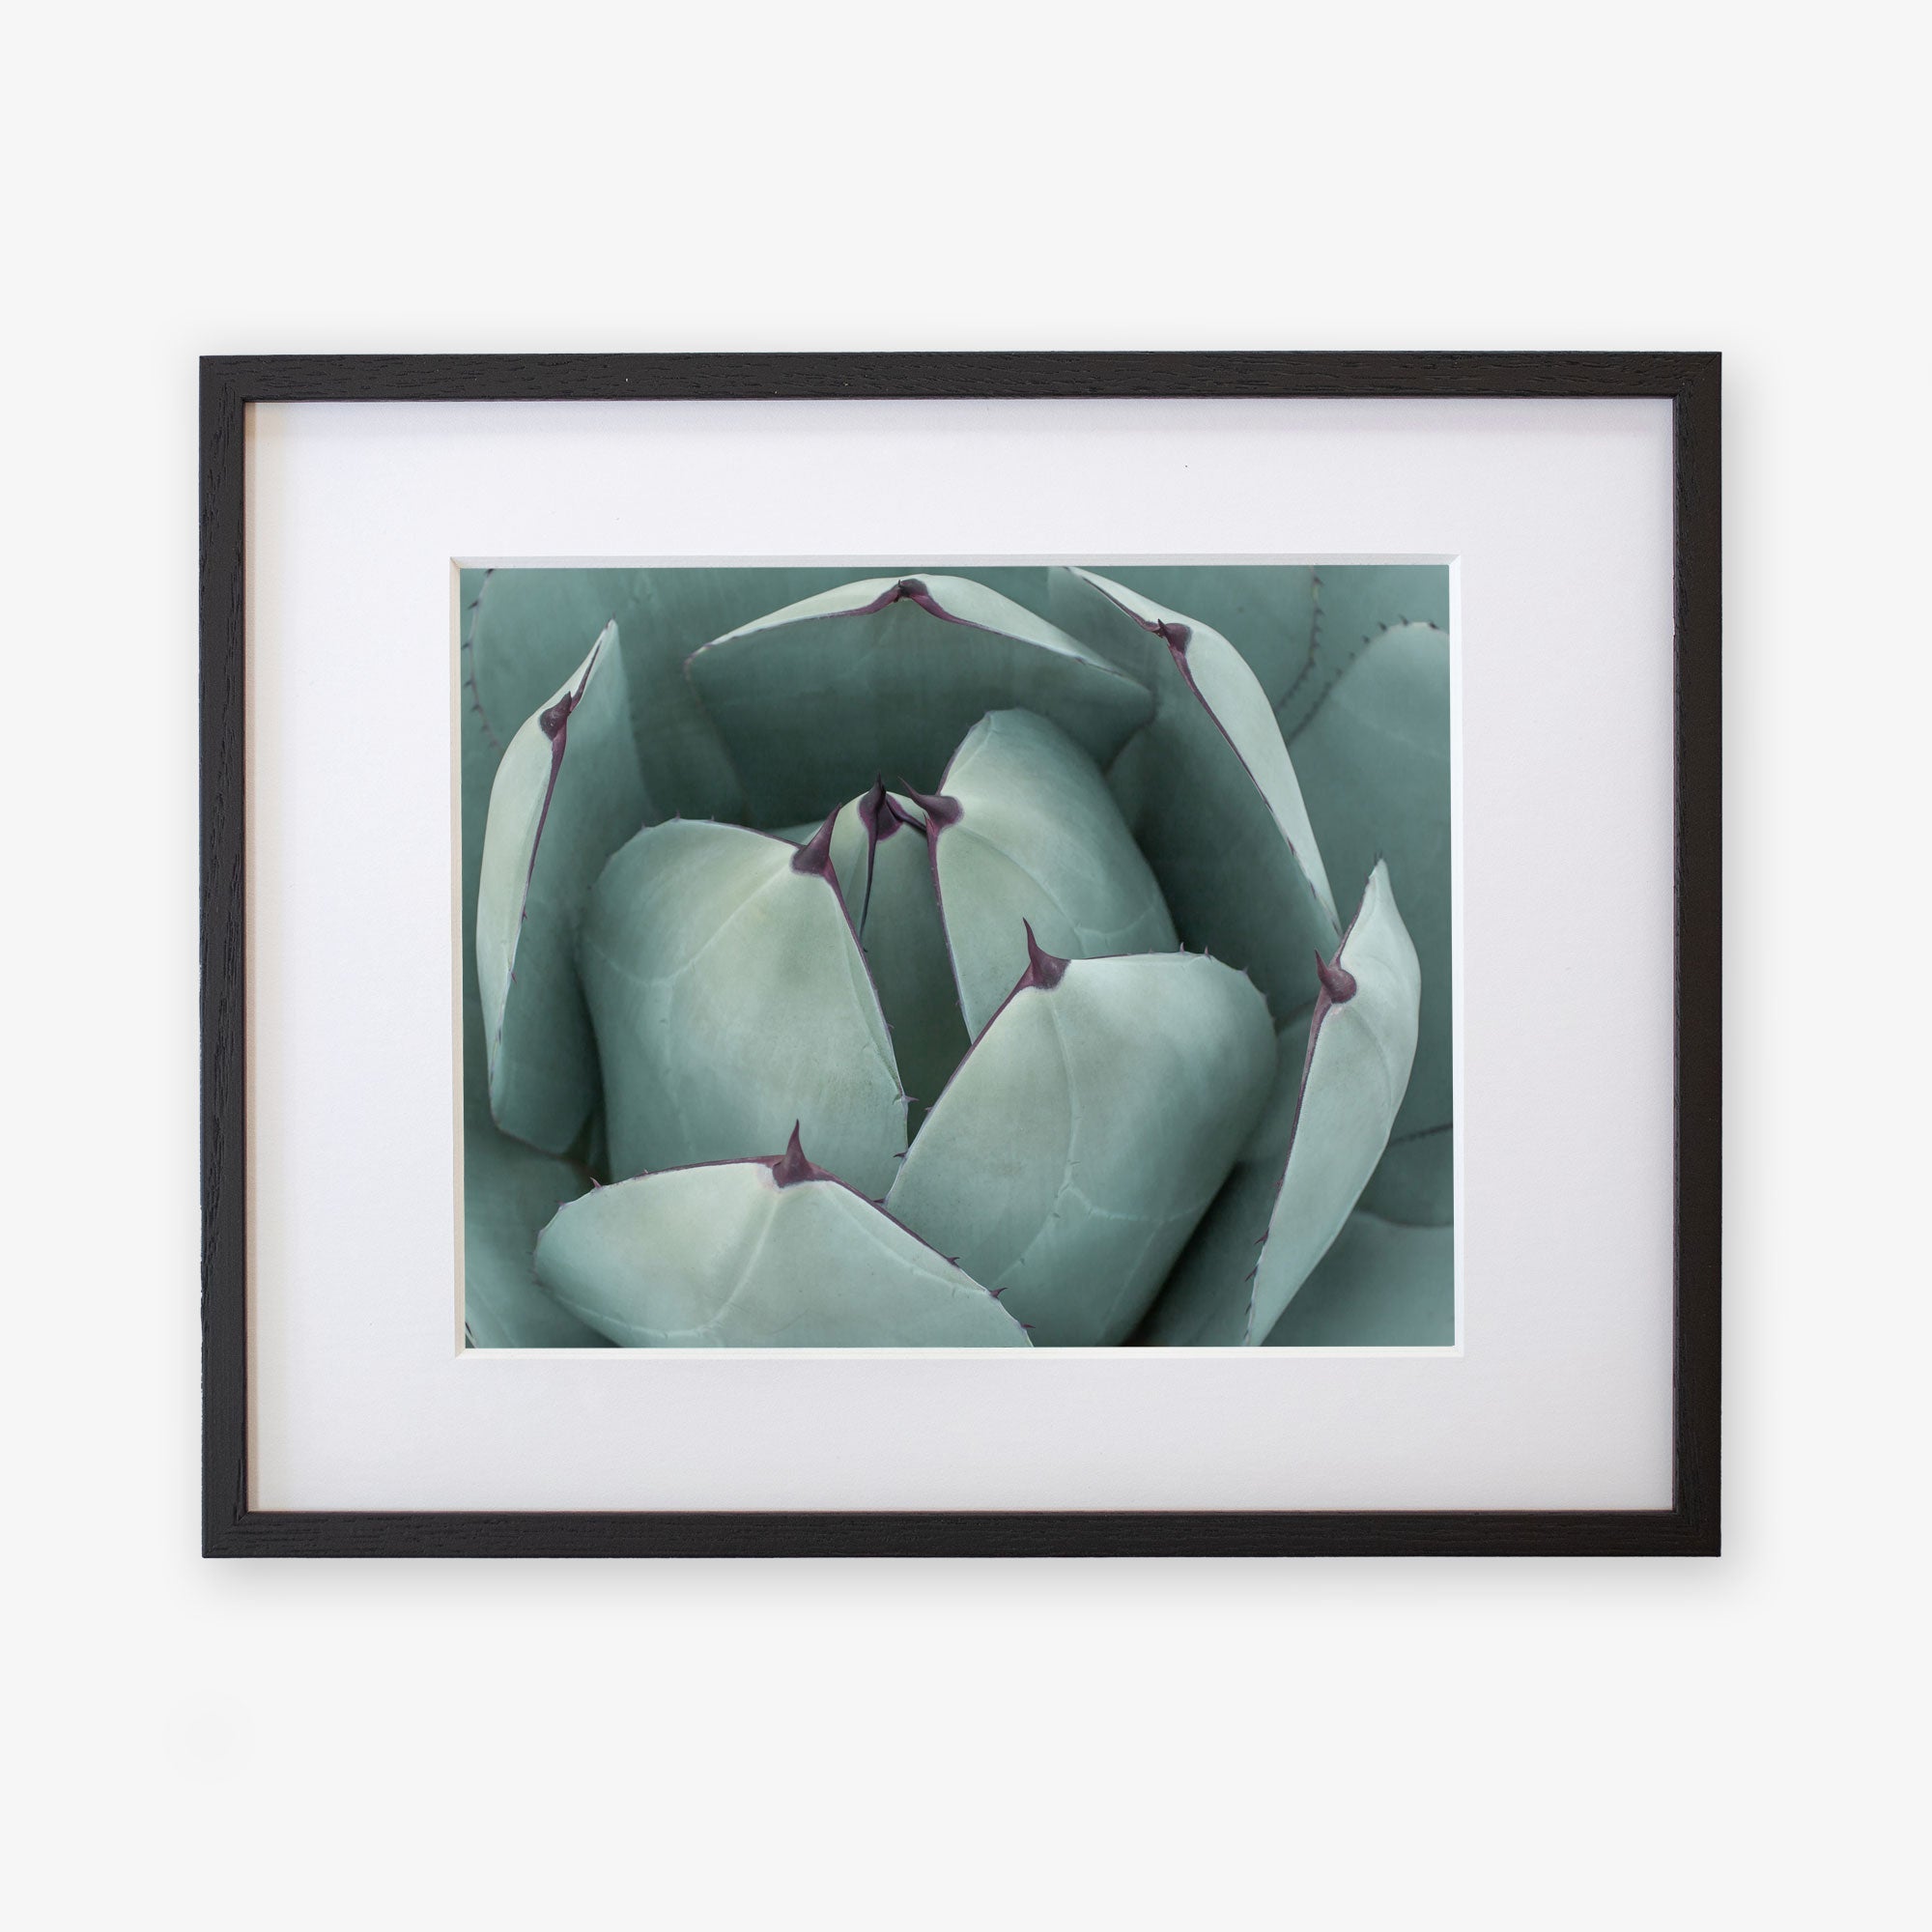 Framed photograph of a Abstract Teal Green Botanical Print &#39;Teal Petals&#39; by Offley Green, featuring thick, green leaves with purple tips, printed on archival photographic paper and displayed against a simple white background.